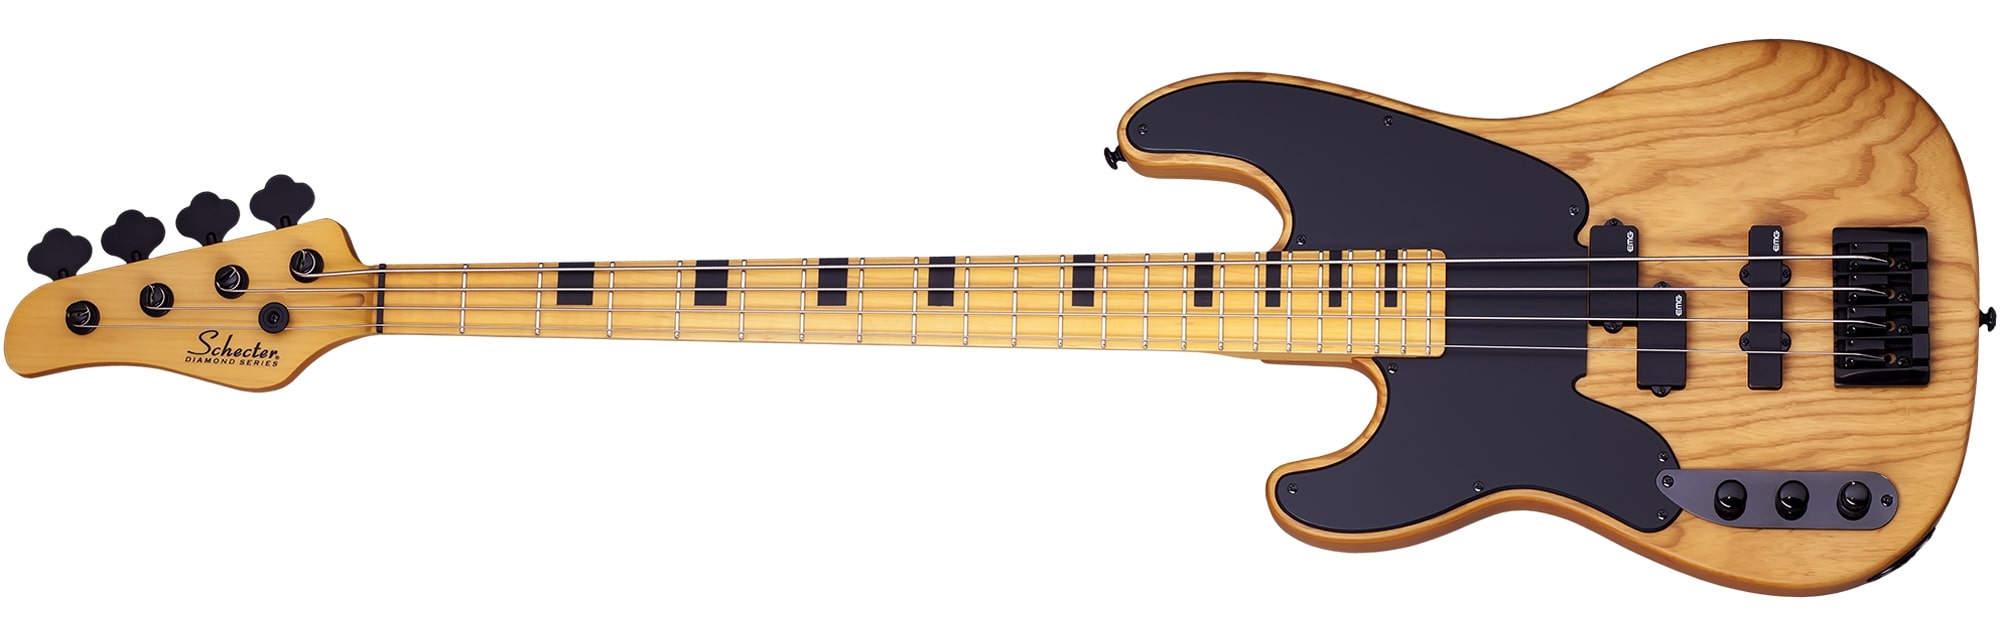 Schecter Model-T Session Left-Handed Electric Bass, Aged Natural Satin 2849-SHC